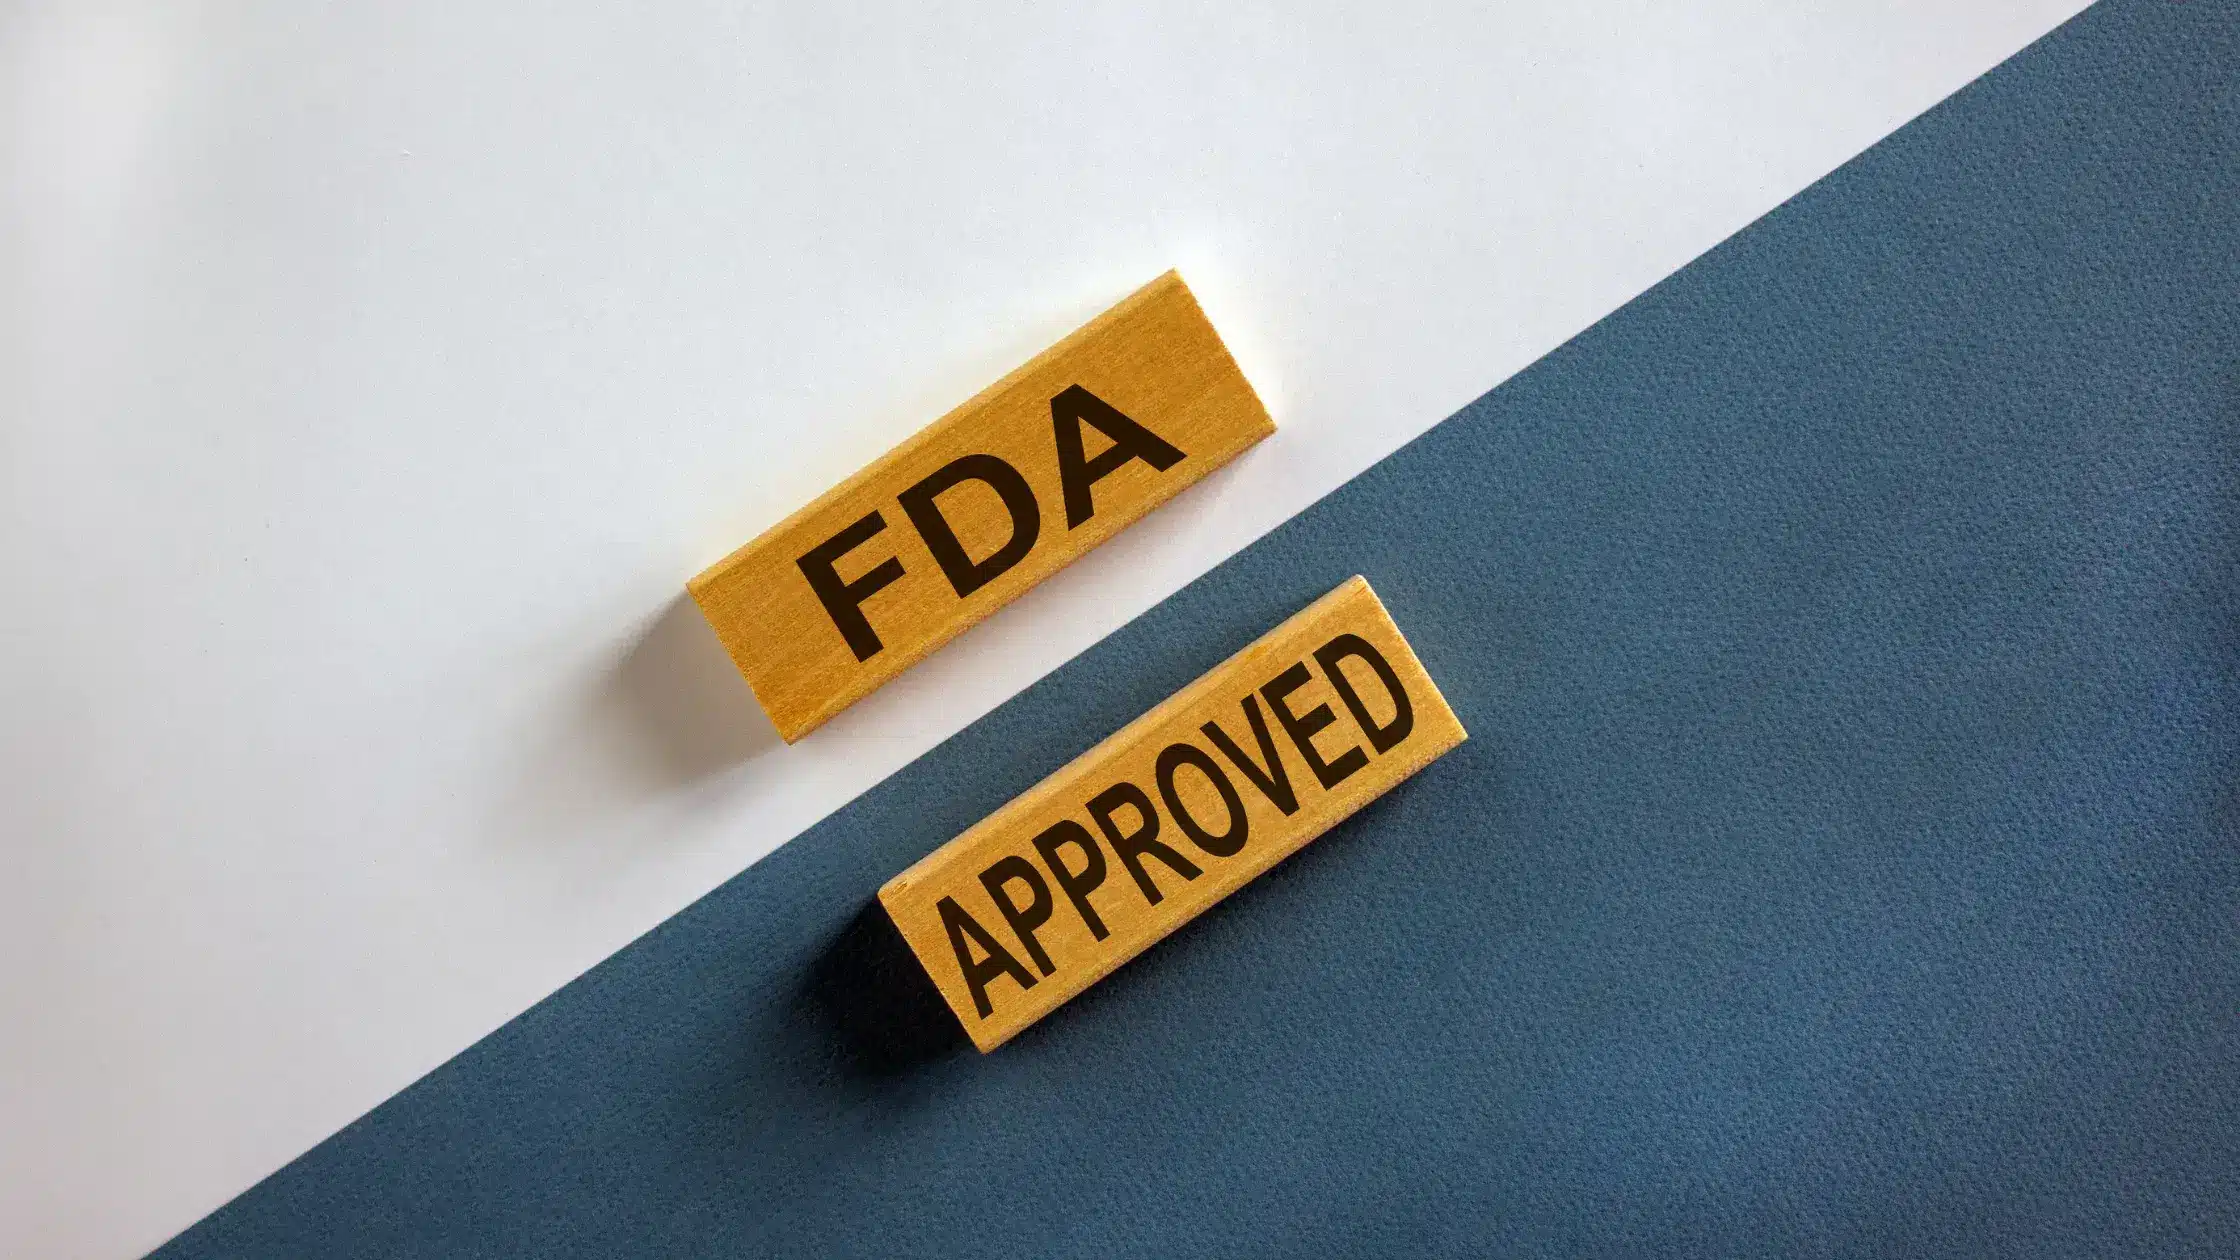 FDA approved image